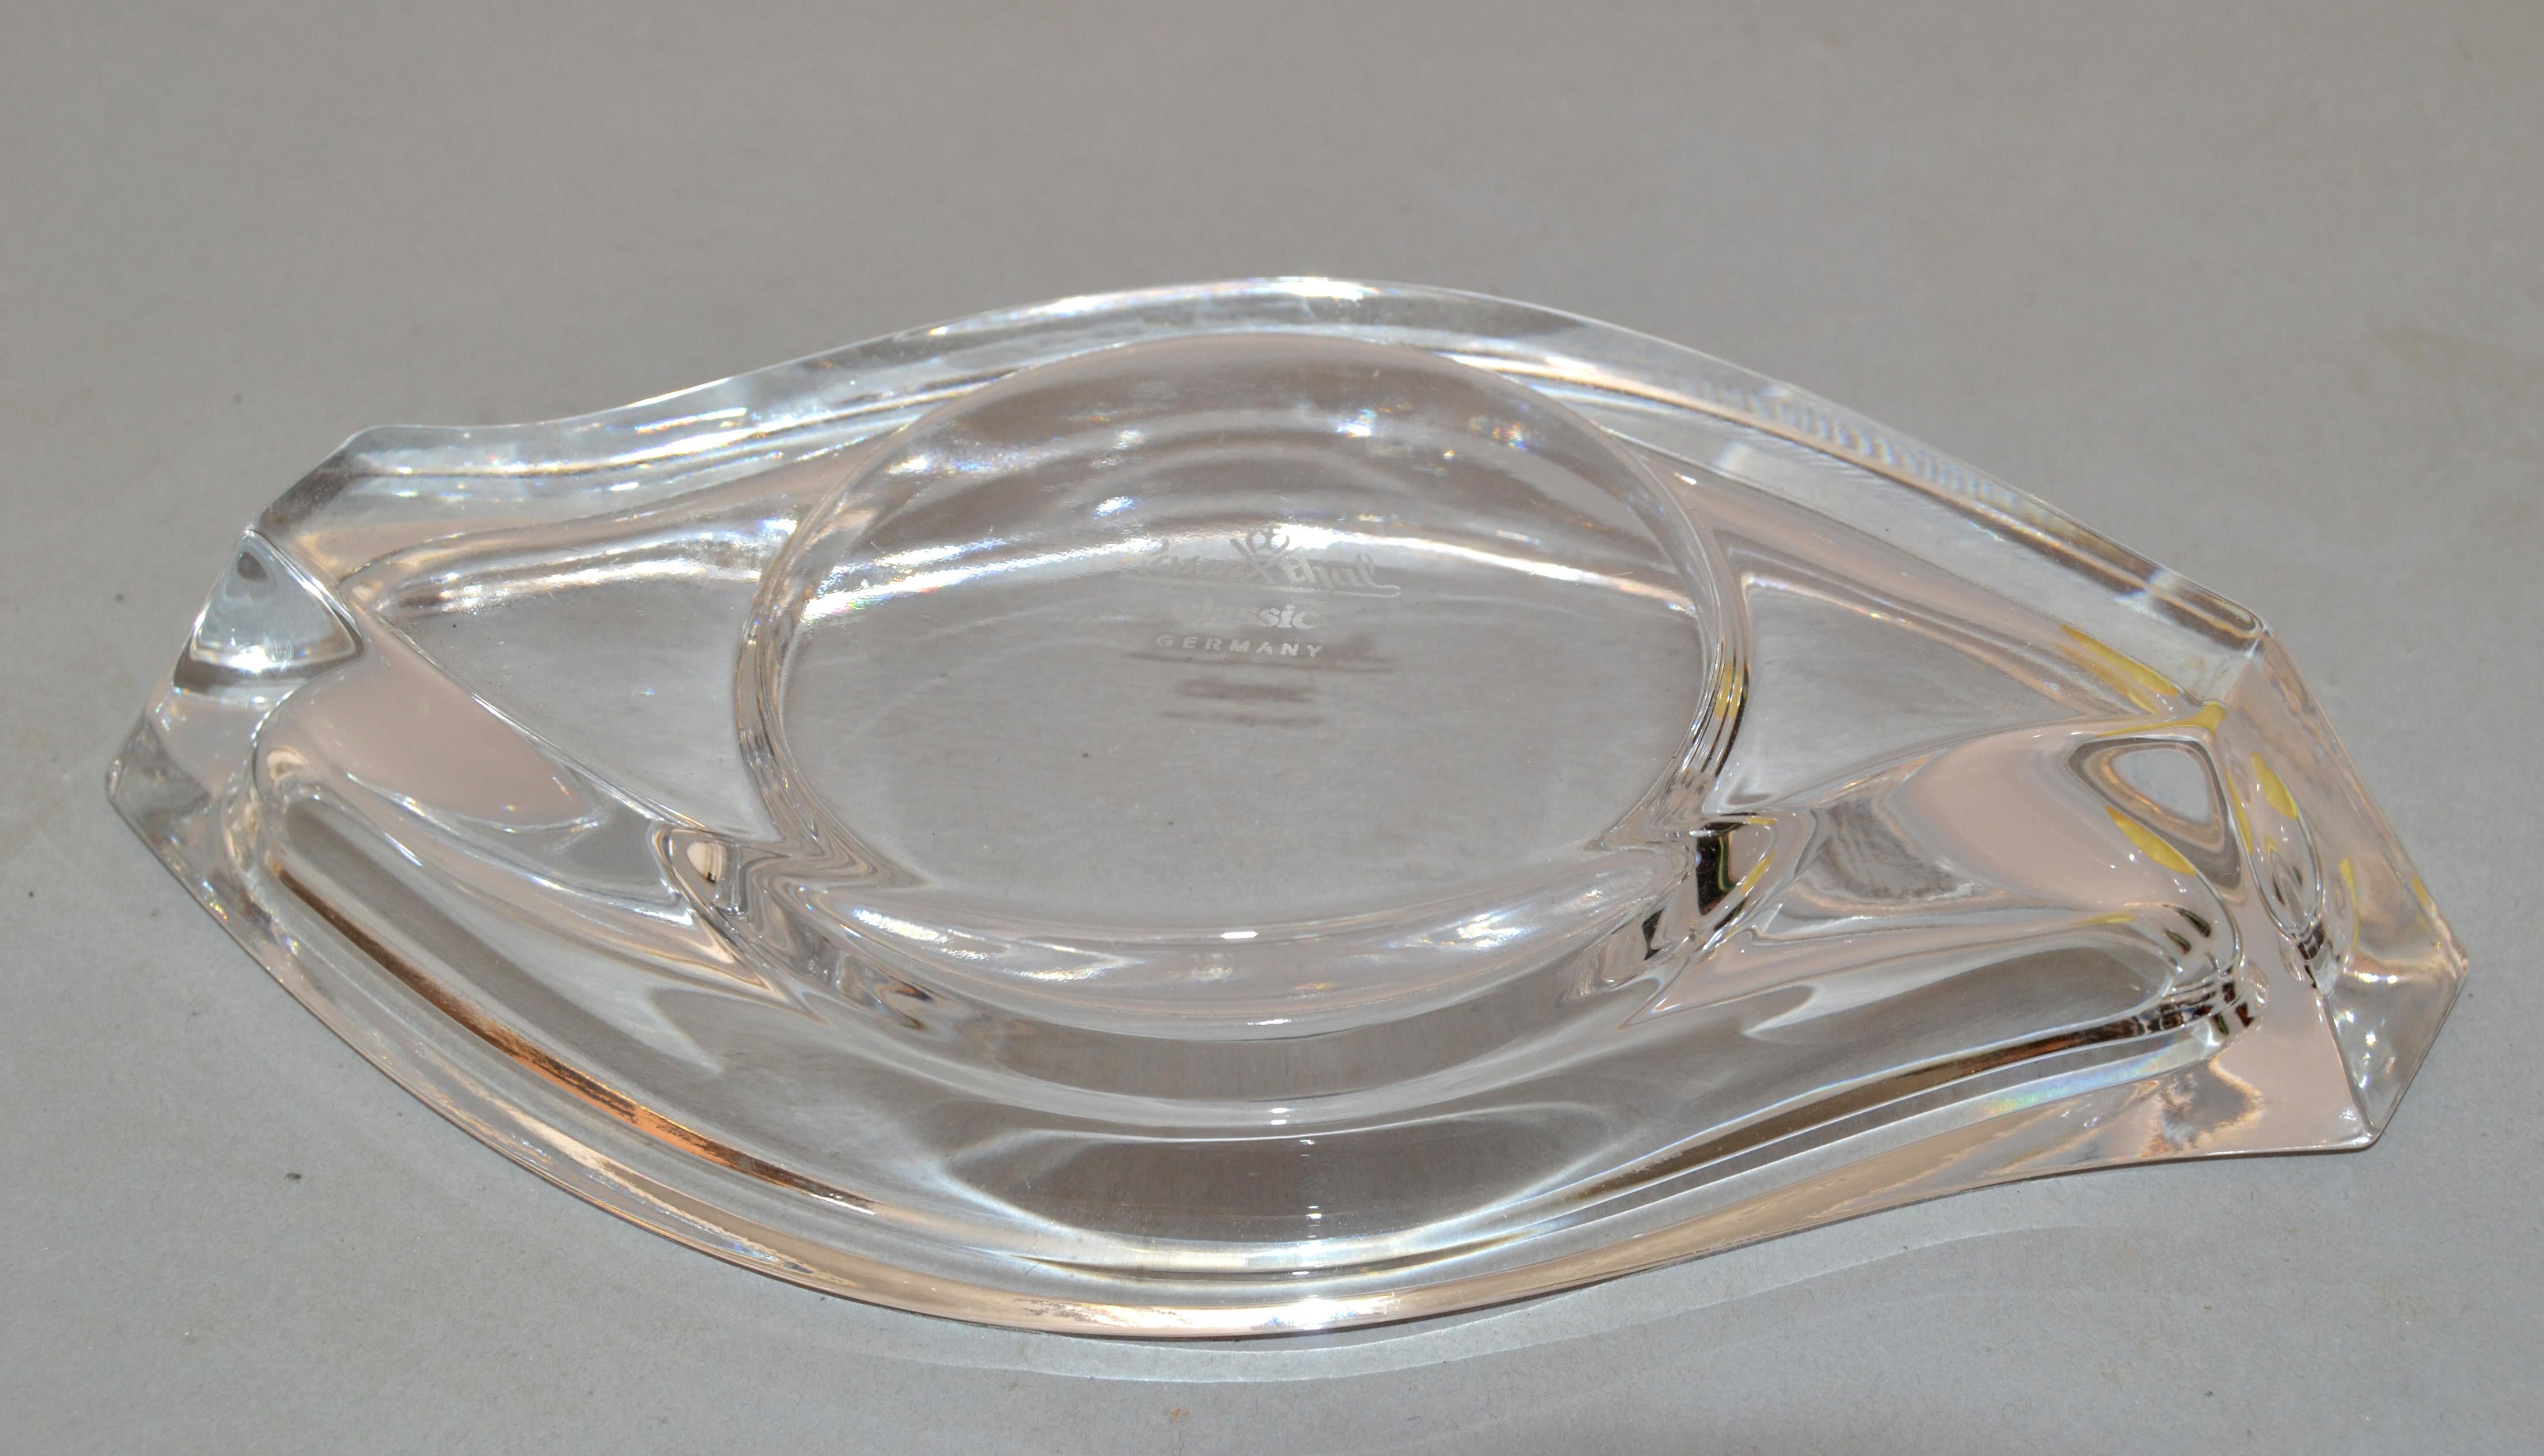 Classic Rosenthal Horizon Lead Crystal Glass Candle Holder Catchall Vide Poche In Good Condition For Sale In Miami, FL